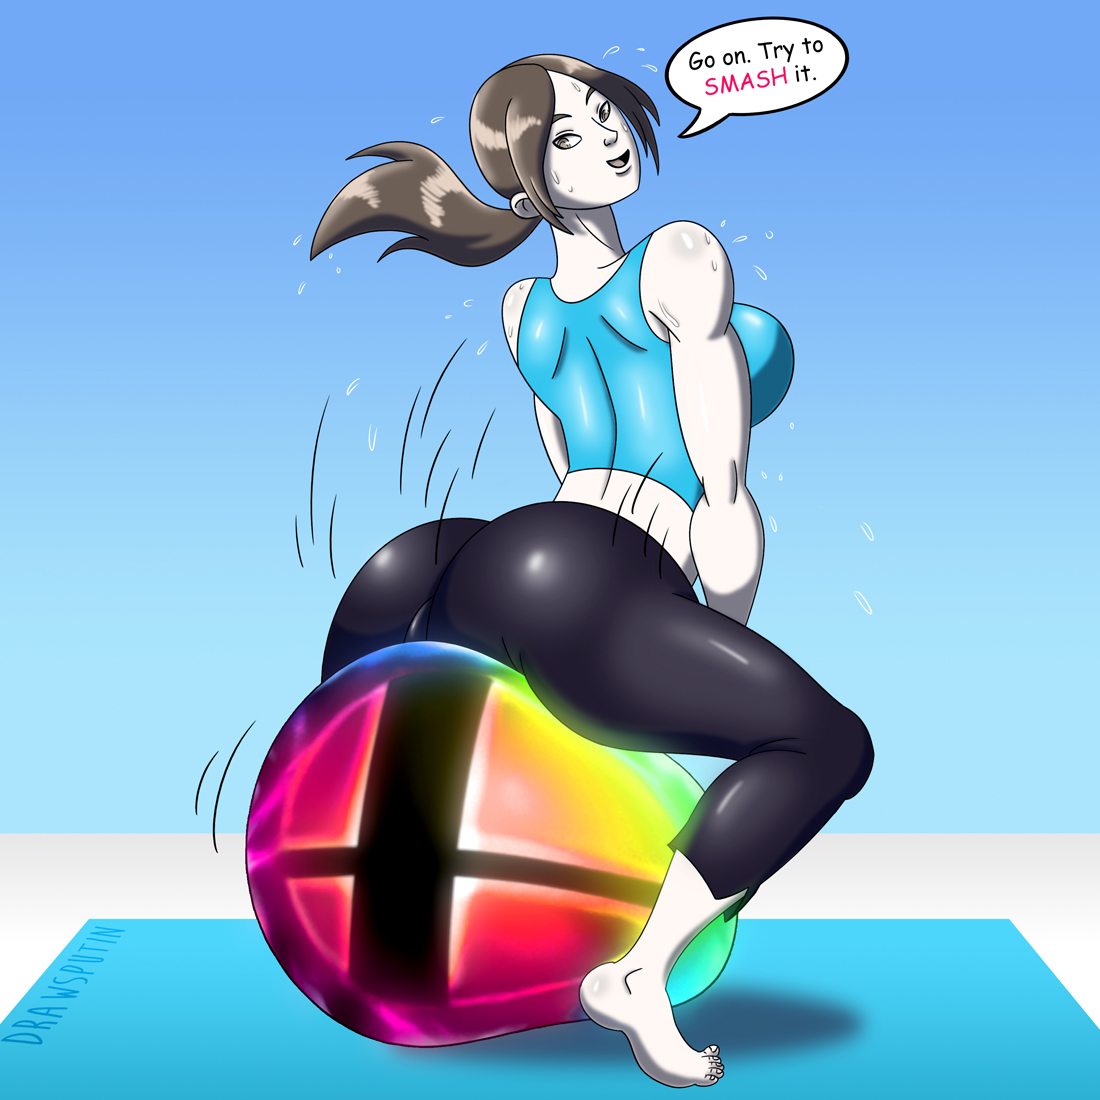 Wii Fit Smasher. 